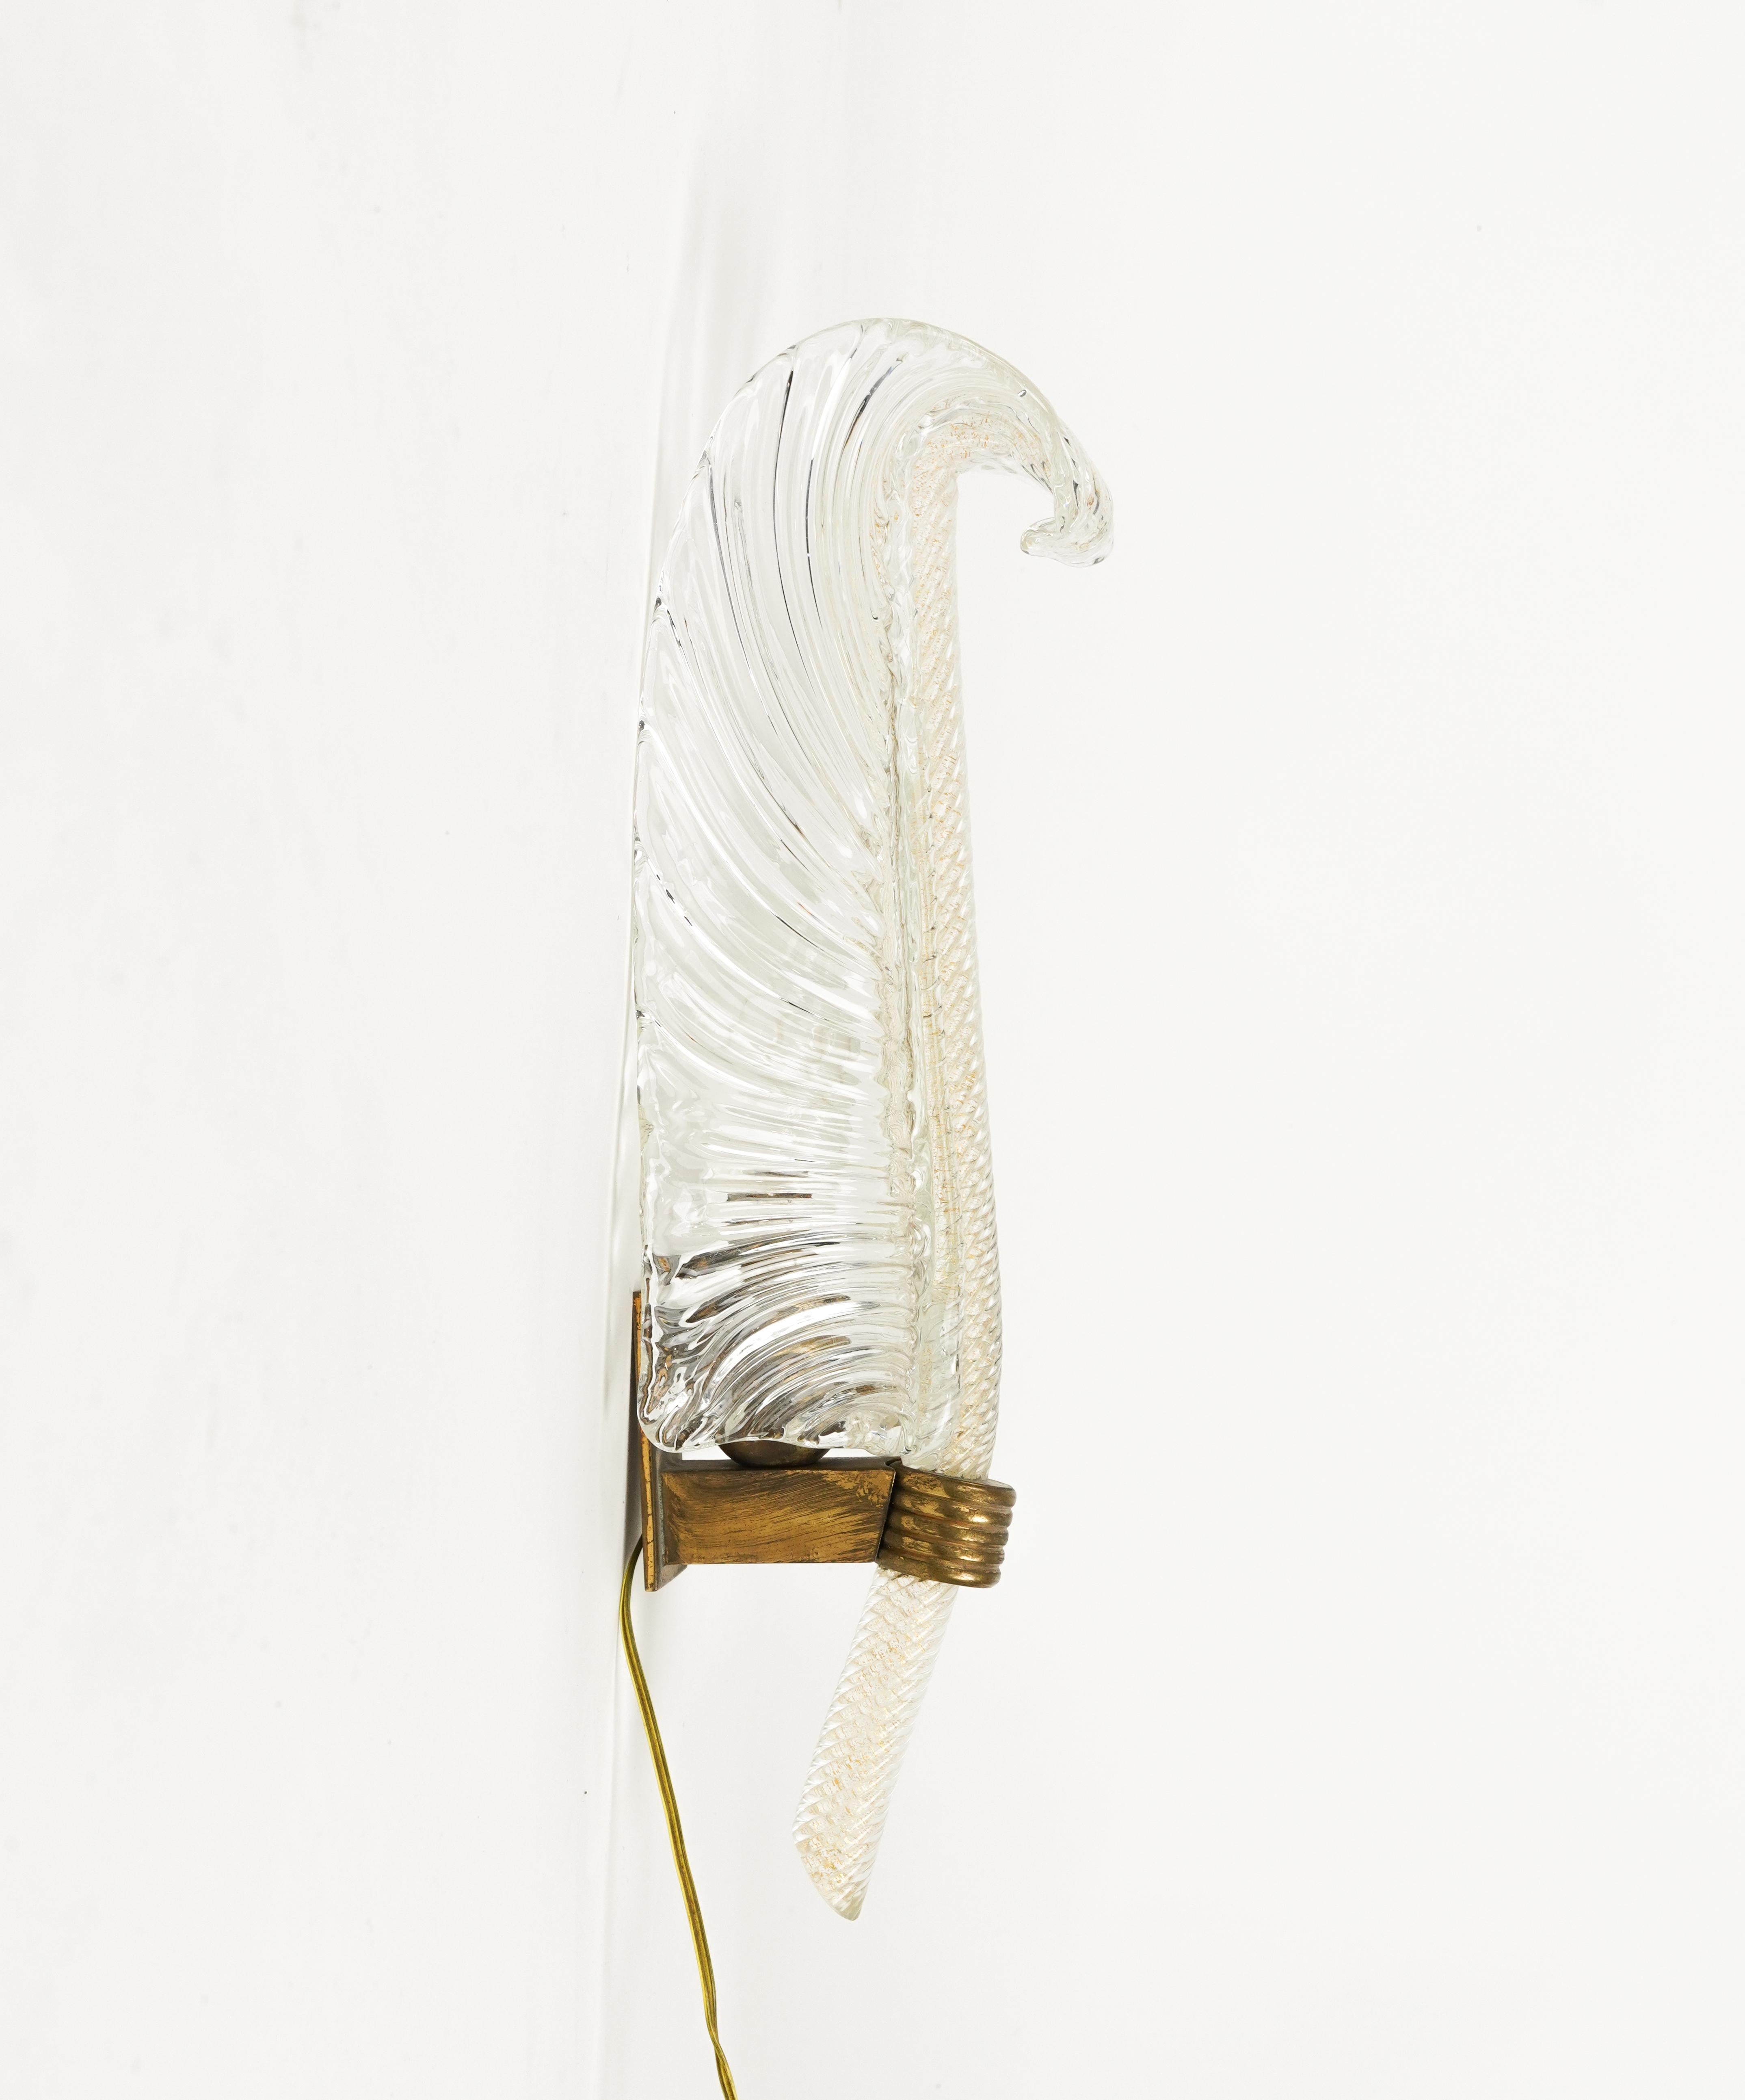 Metal Wall Lamp Sconce in Murano Glass and Brass by Barovier & Toso, Italy 1940s For Sale